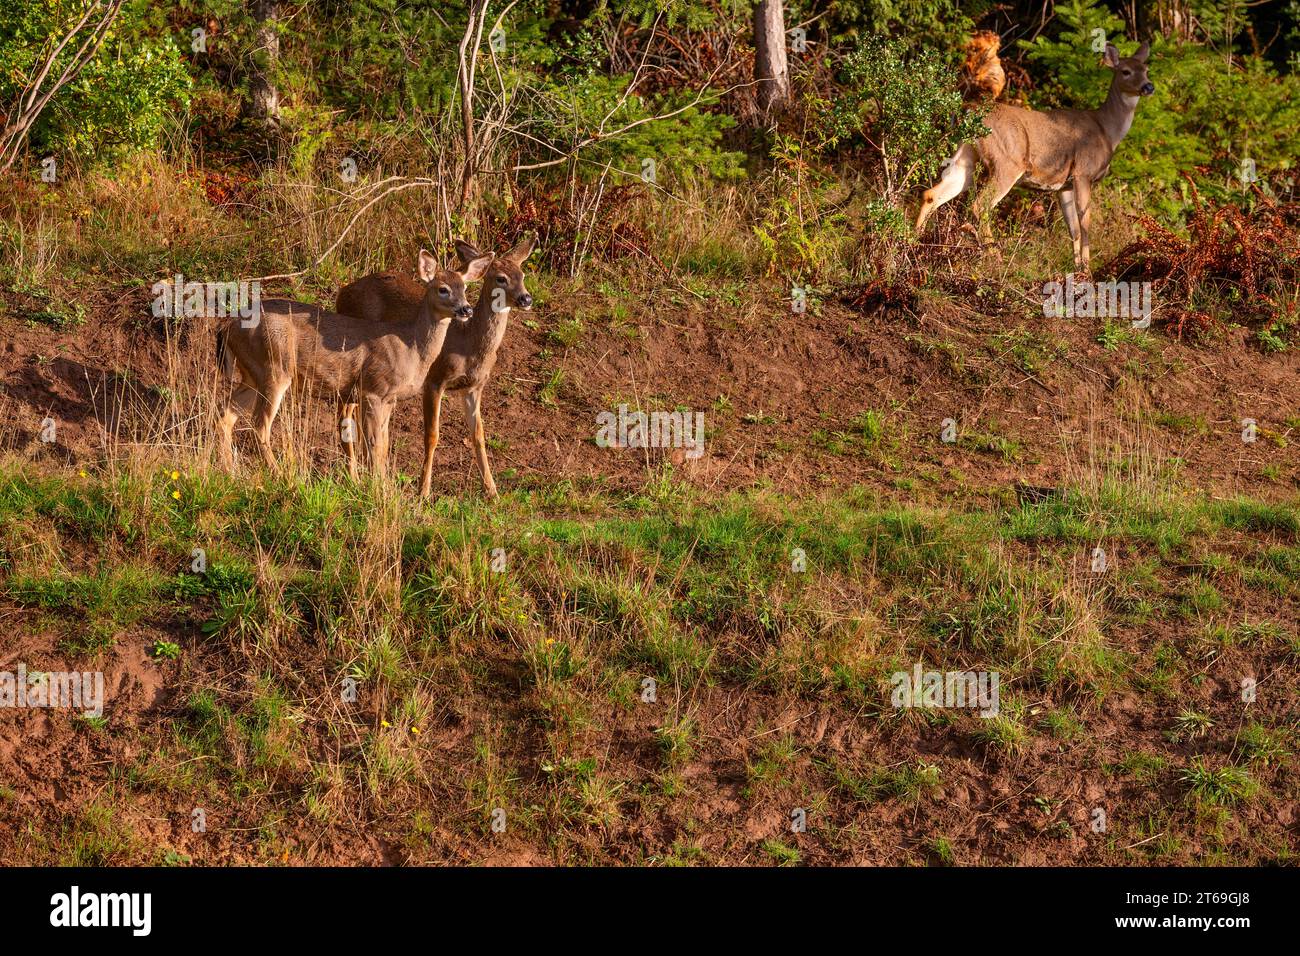 Two yearling deer and a doe lood towards camera from a hillside during the golden hours of the day. Stock Photo